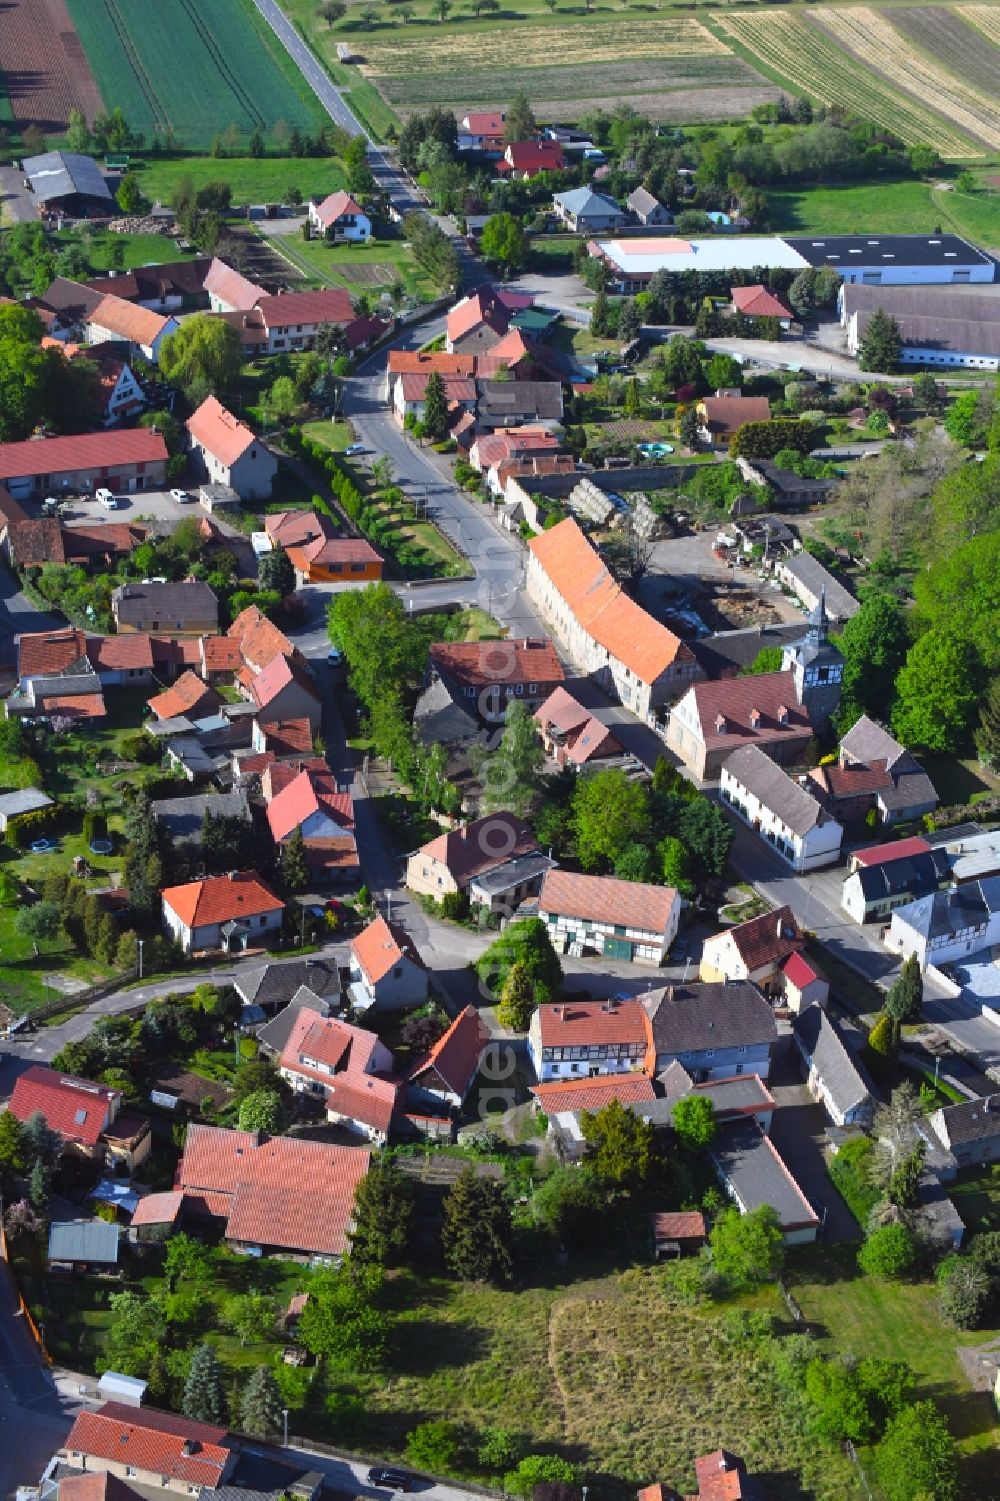 Aerial image Wickerode - Agricultural land and field borders surround the settlement area of the village in Wickerode in the state Saxony-Anhalt, Germany